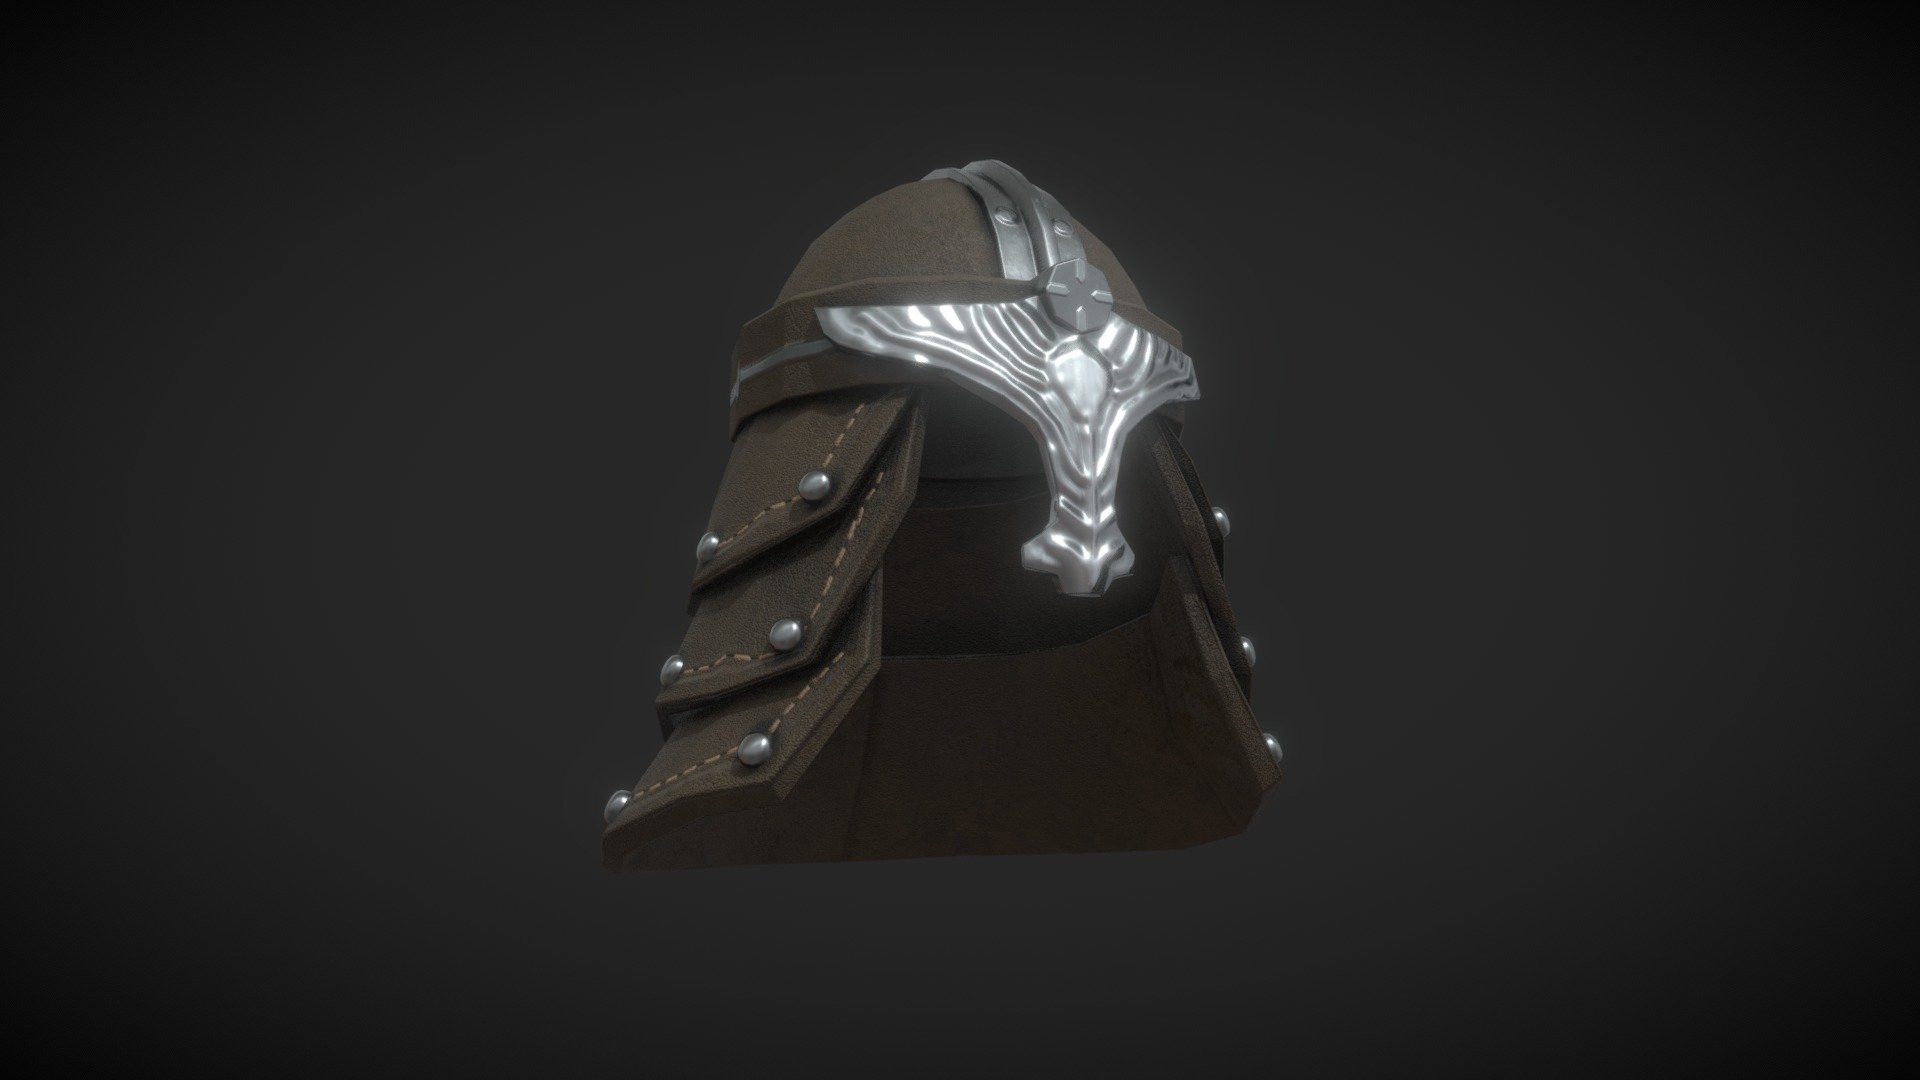 My version of Leather helmet from skyrim, made in Blender and Substance Painter - Skyrim - Leather helmet - 3D model by gabrielnrtr 3d model